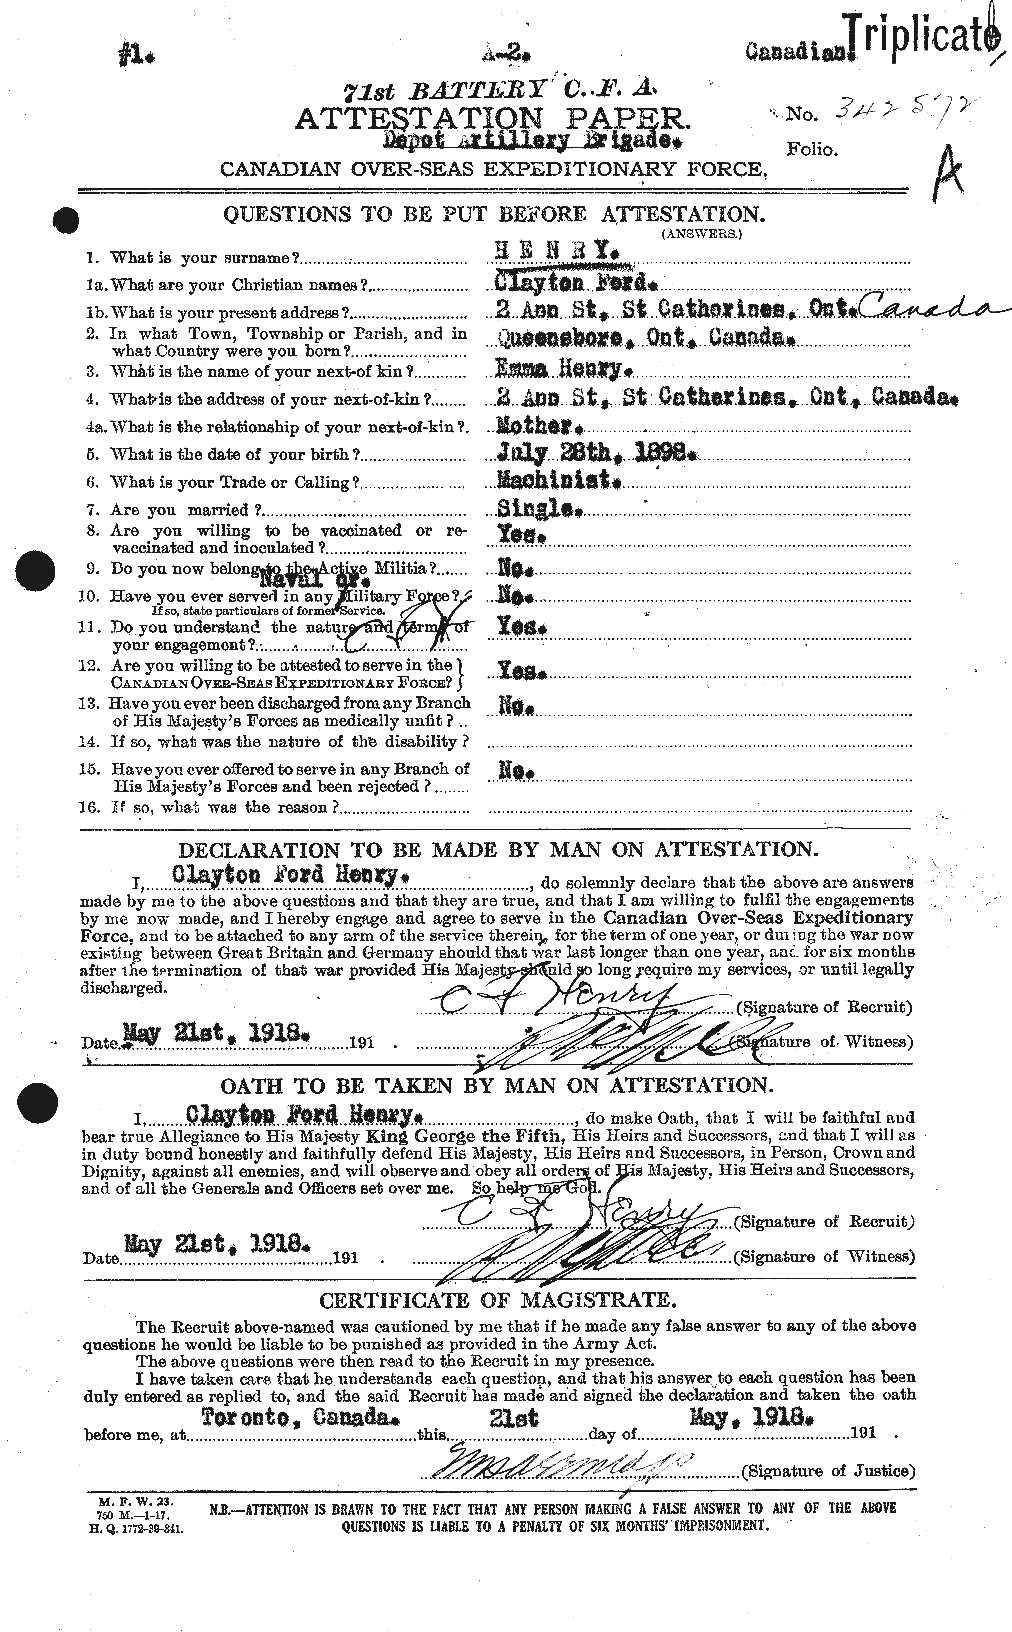 Personnel Records of the First World War - CEF 392816a